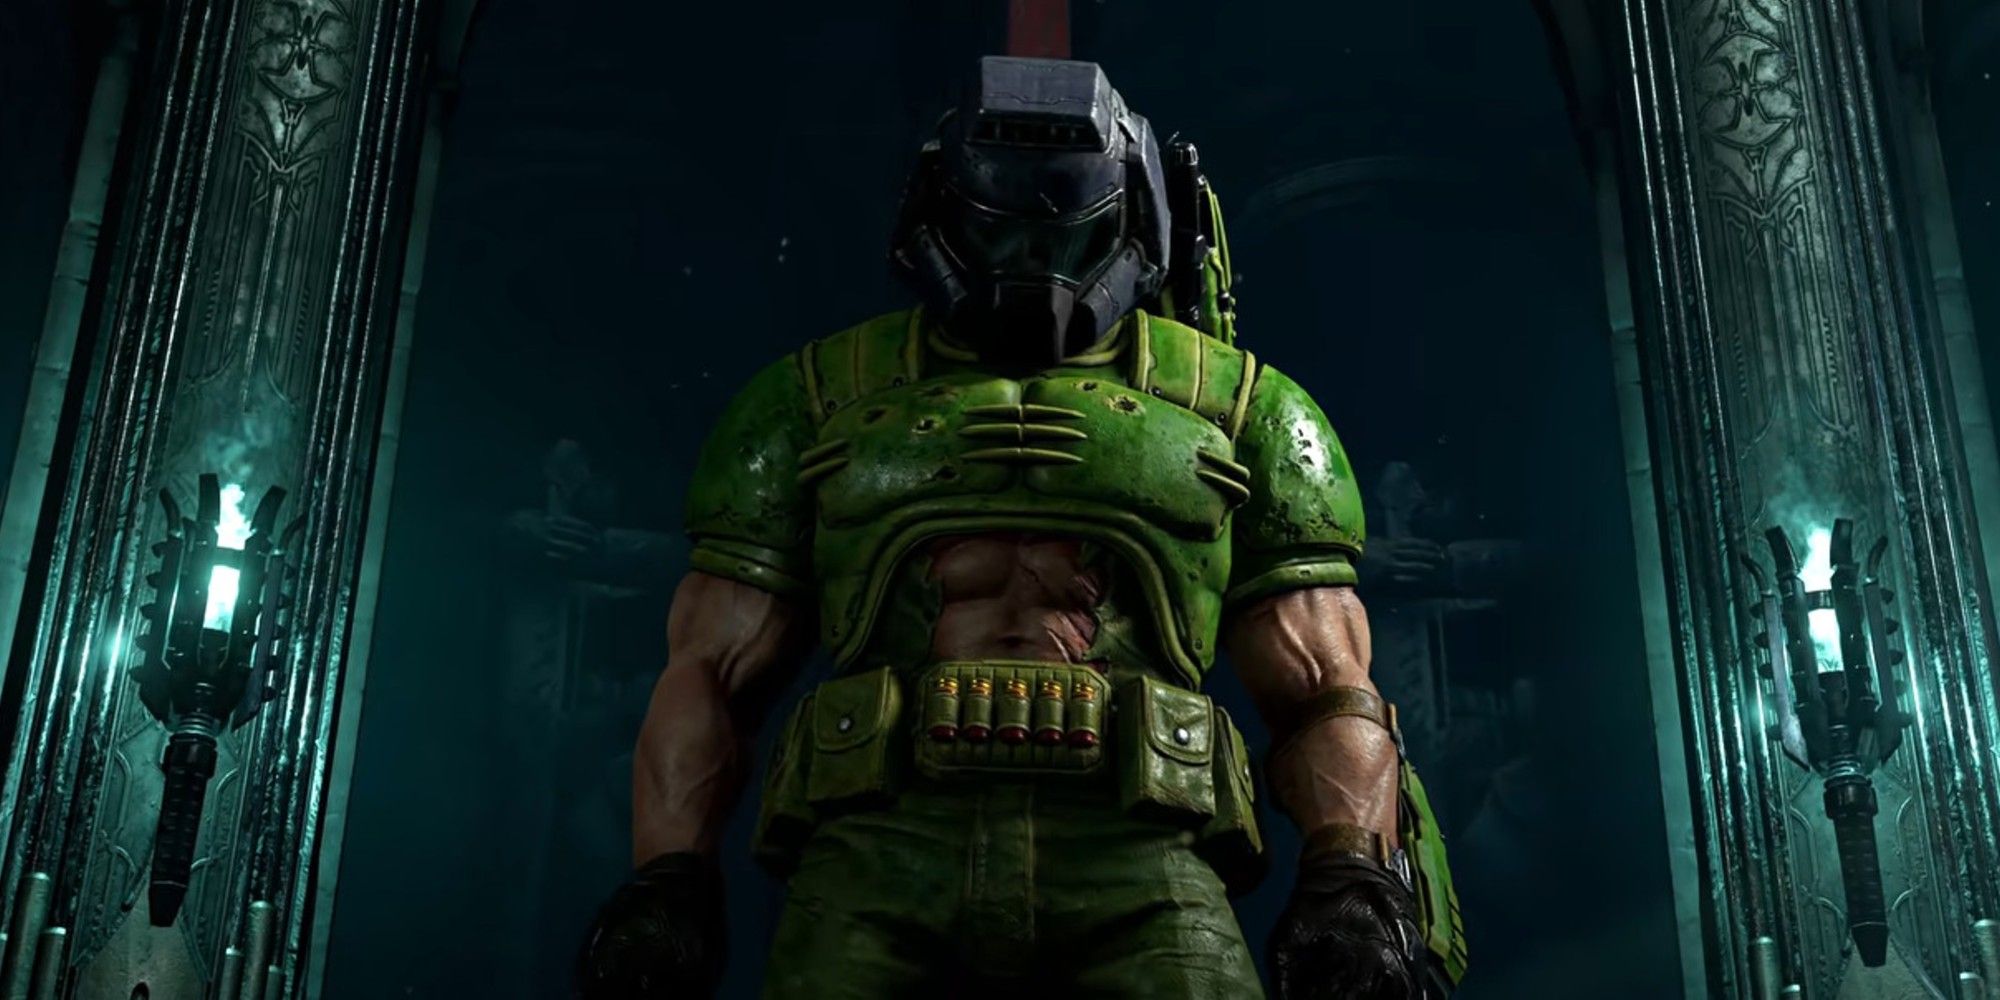 Doom Slayer dressed in the classic Doomguy outfit from the original game.